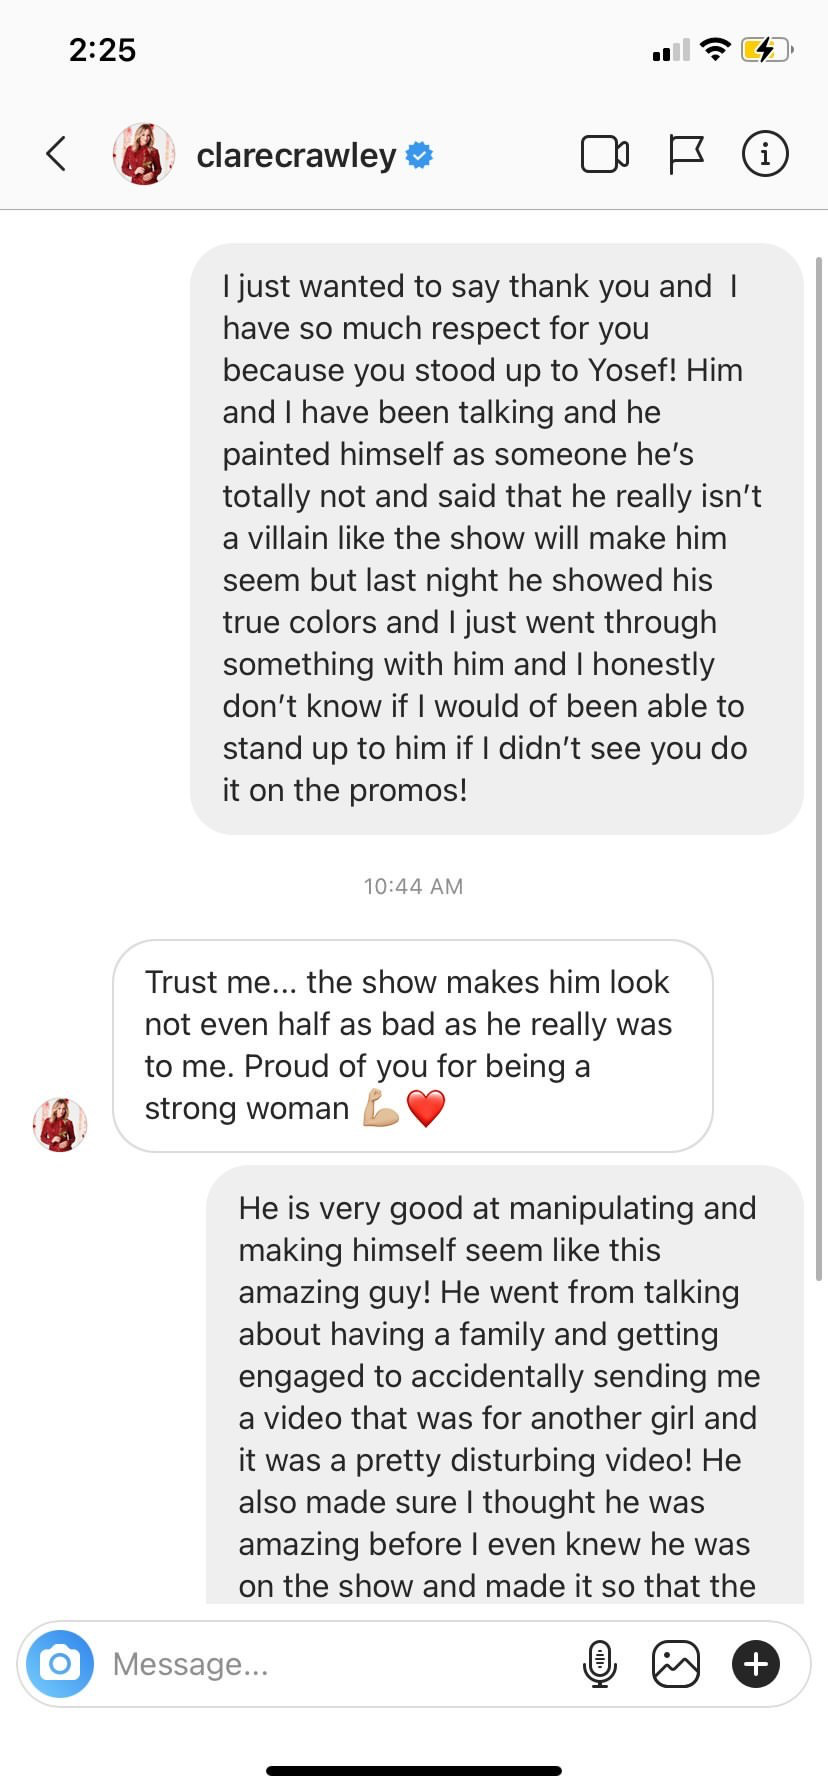 Messages between Clare Crawley and Carly Hammond